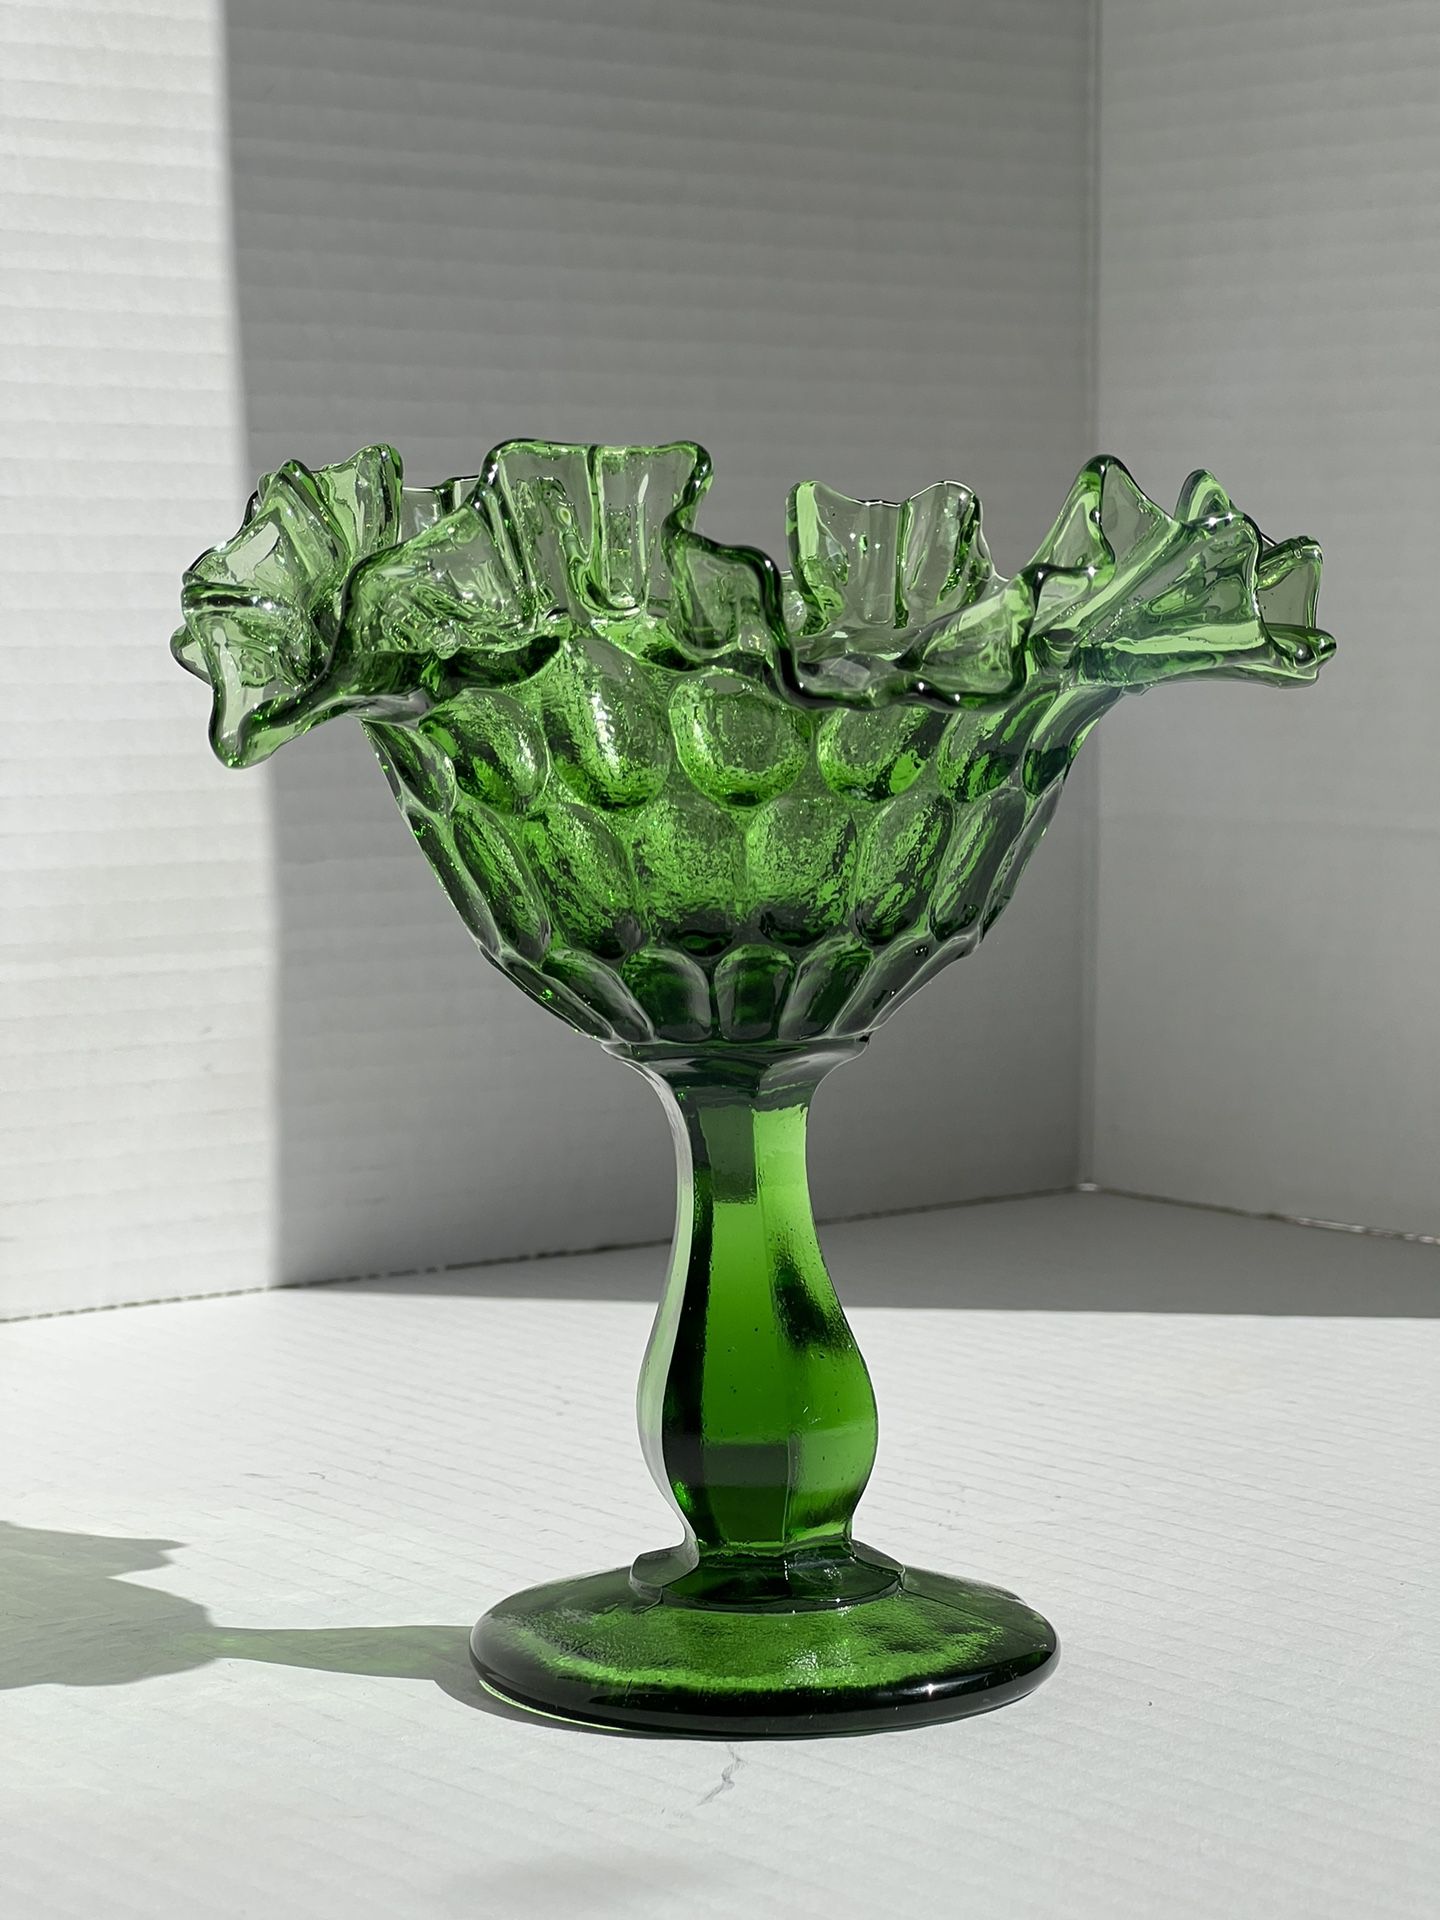 Fenton, Colony Winter Green Thumbprint Ruffled Compote Candy Dish, Double Ruffled Pedestal Candy Dish 6” 